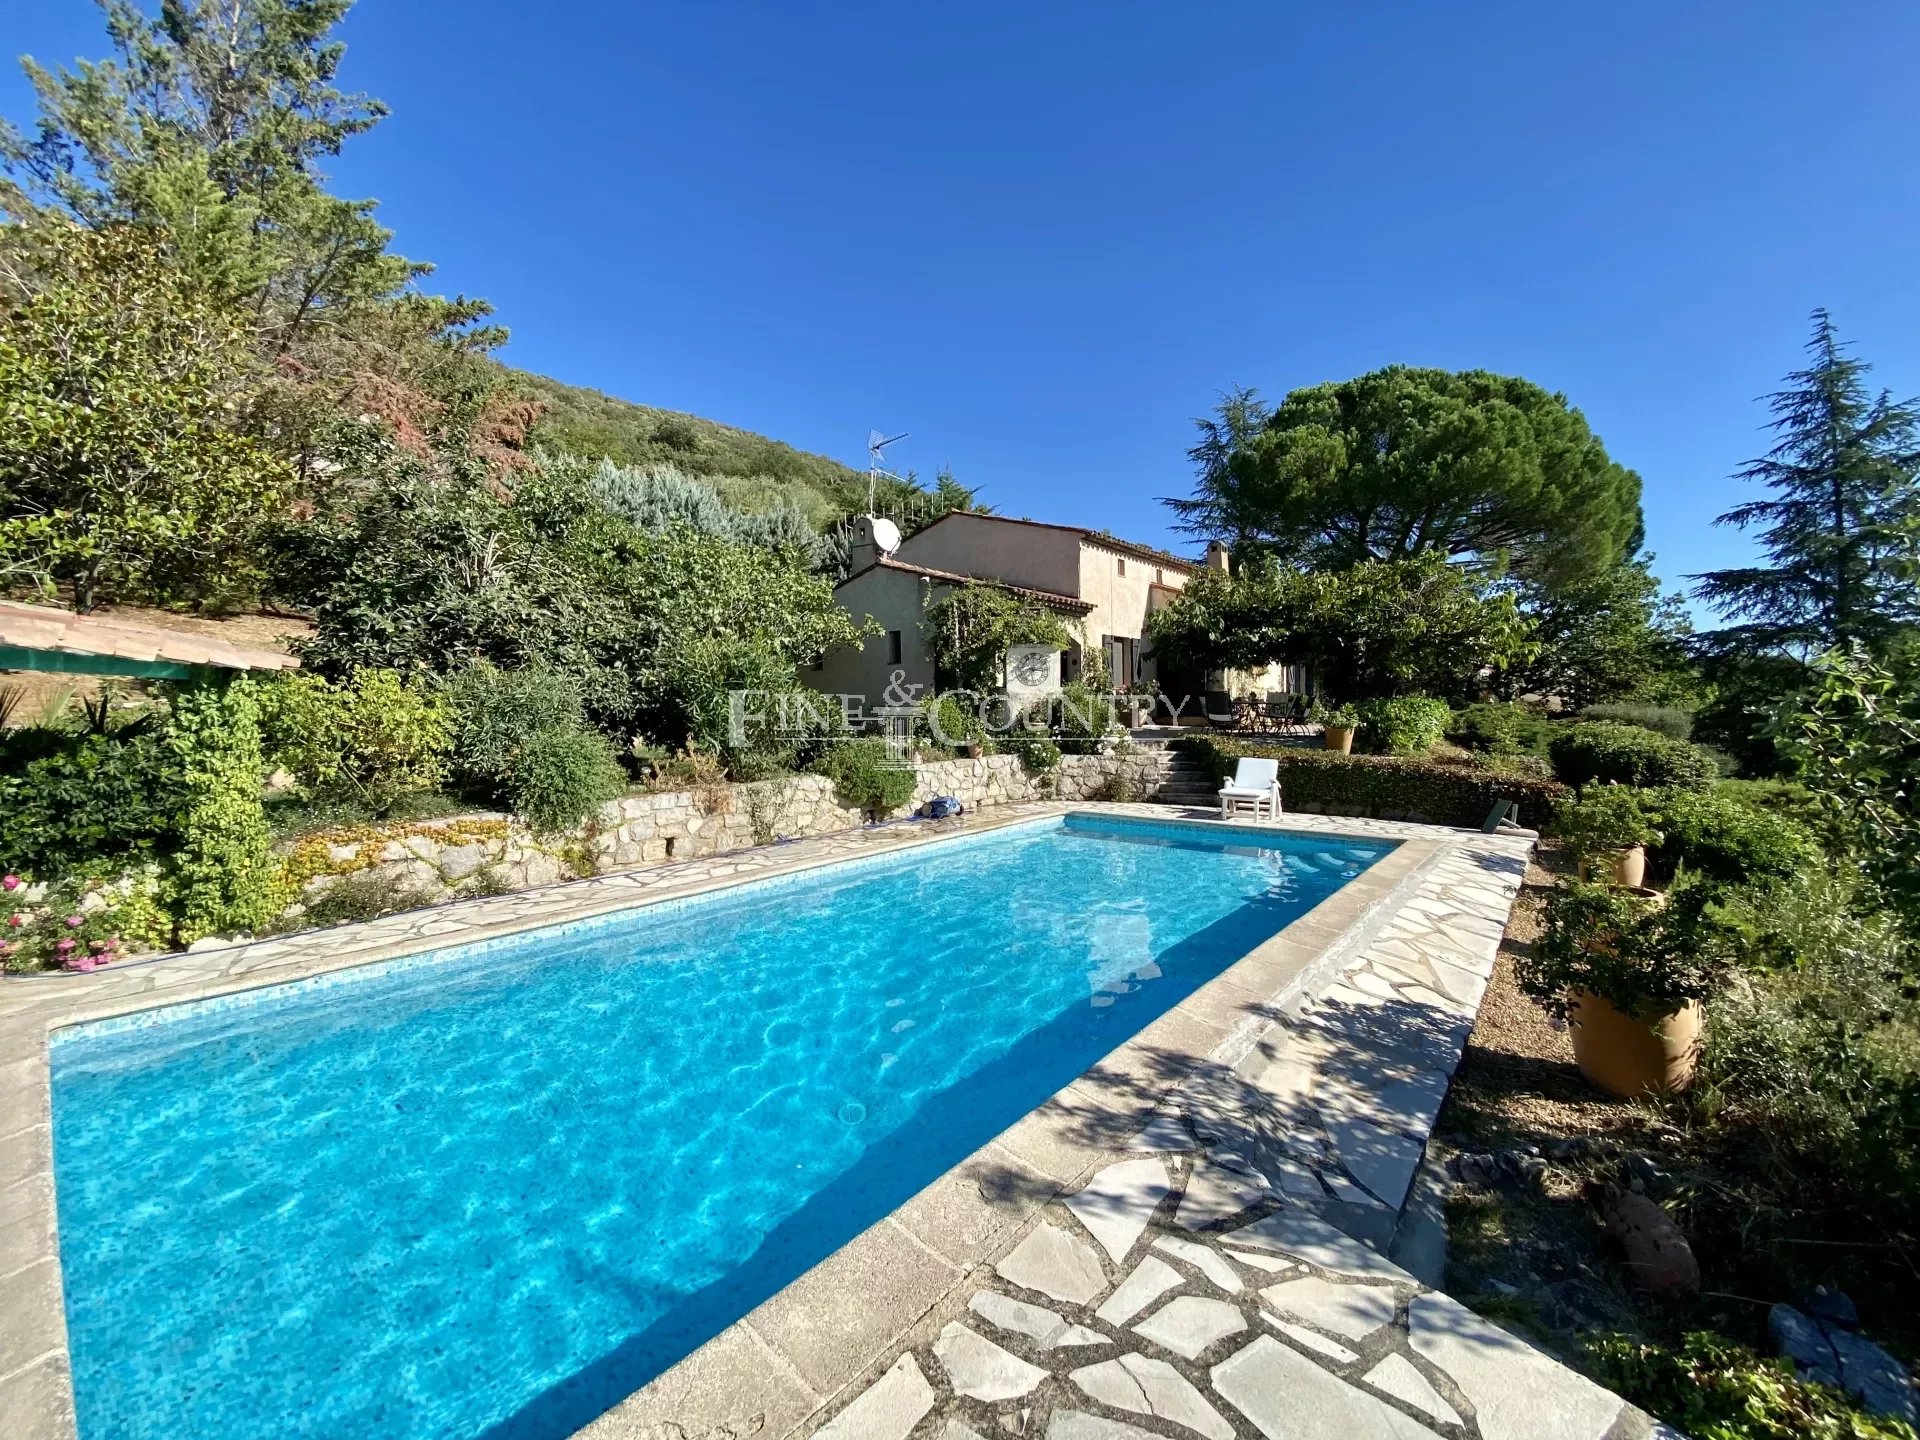 Villa for sale in Montauroux with swimming pool